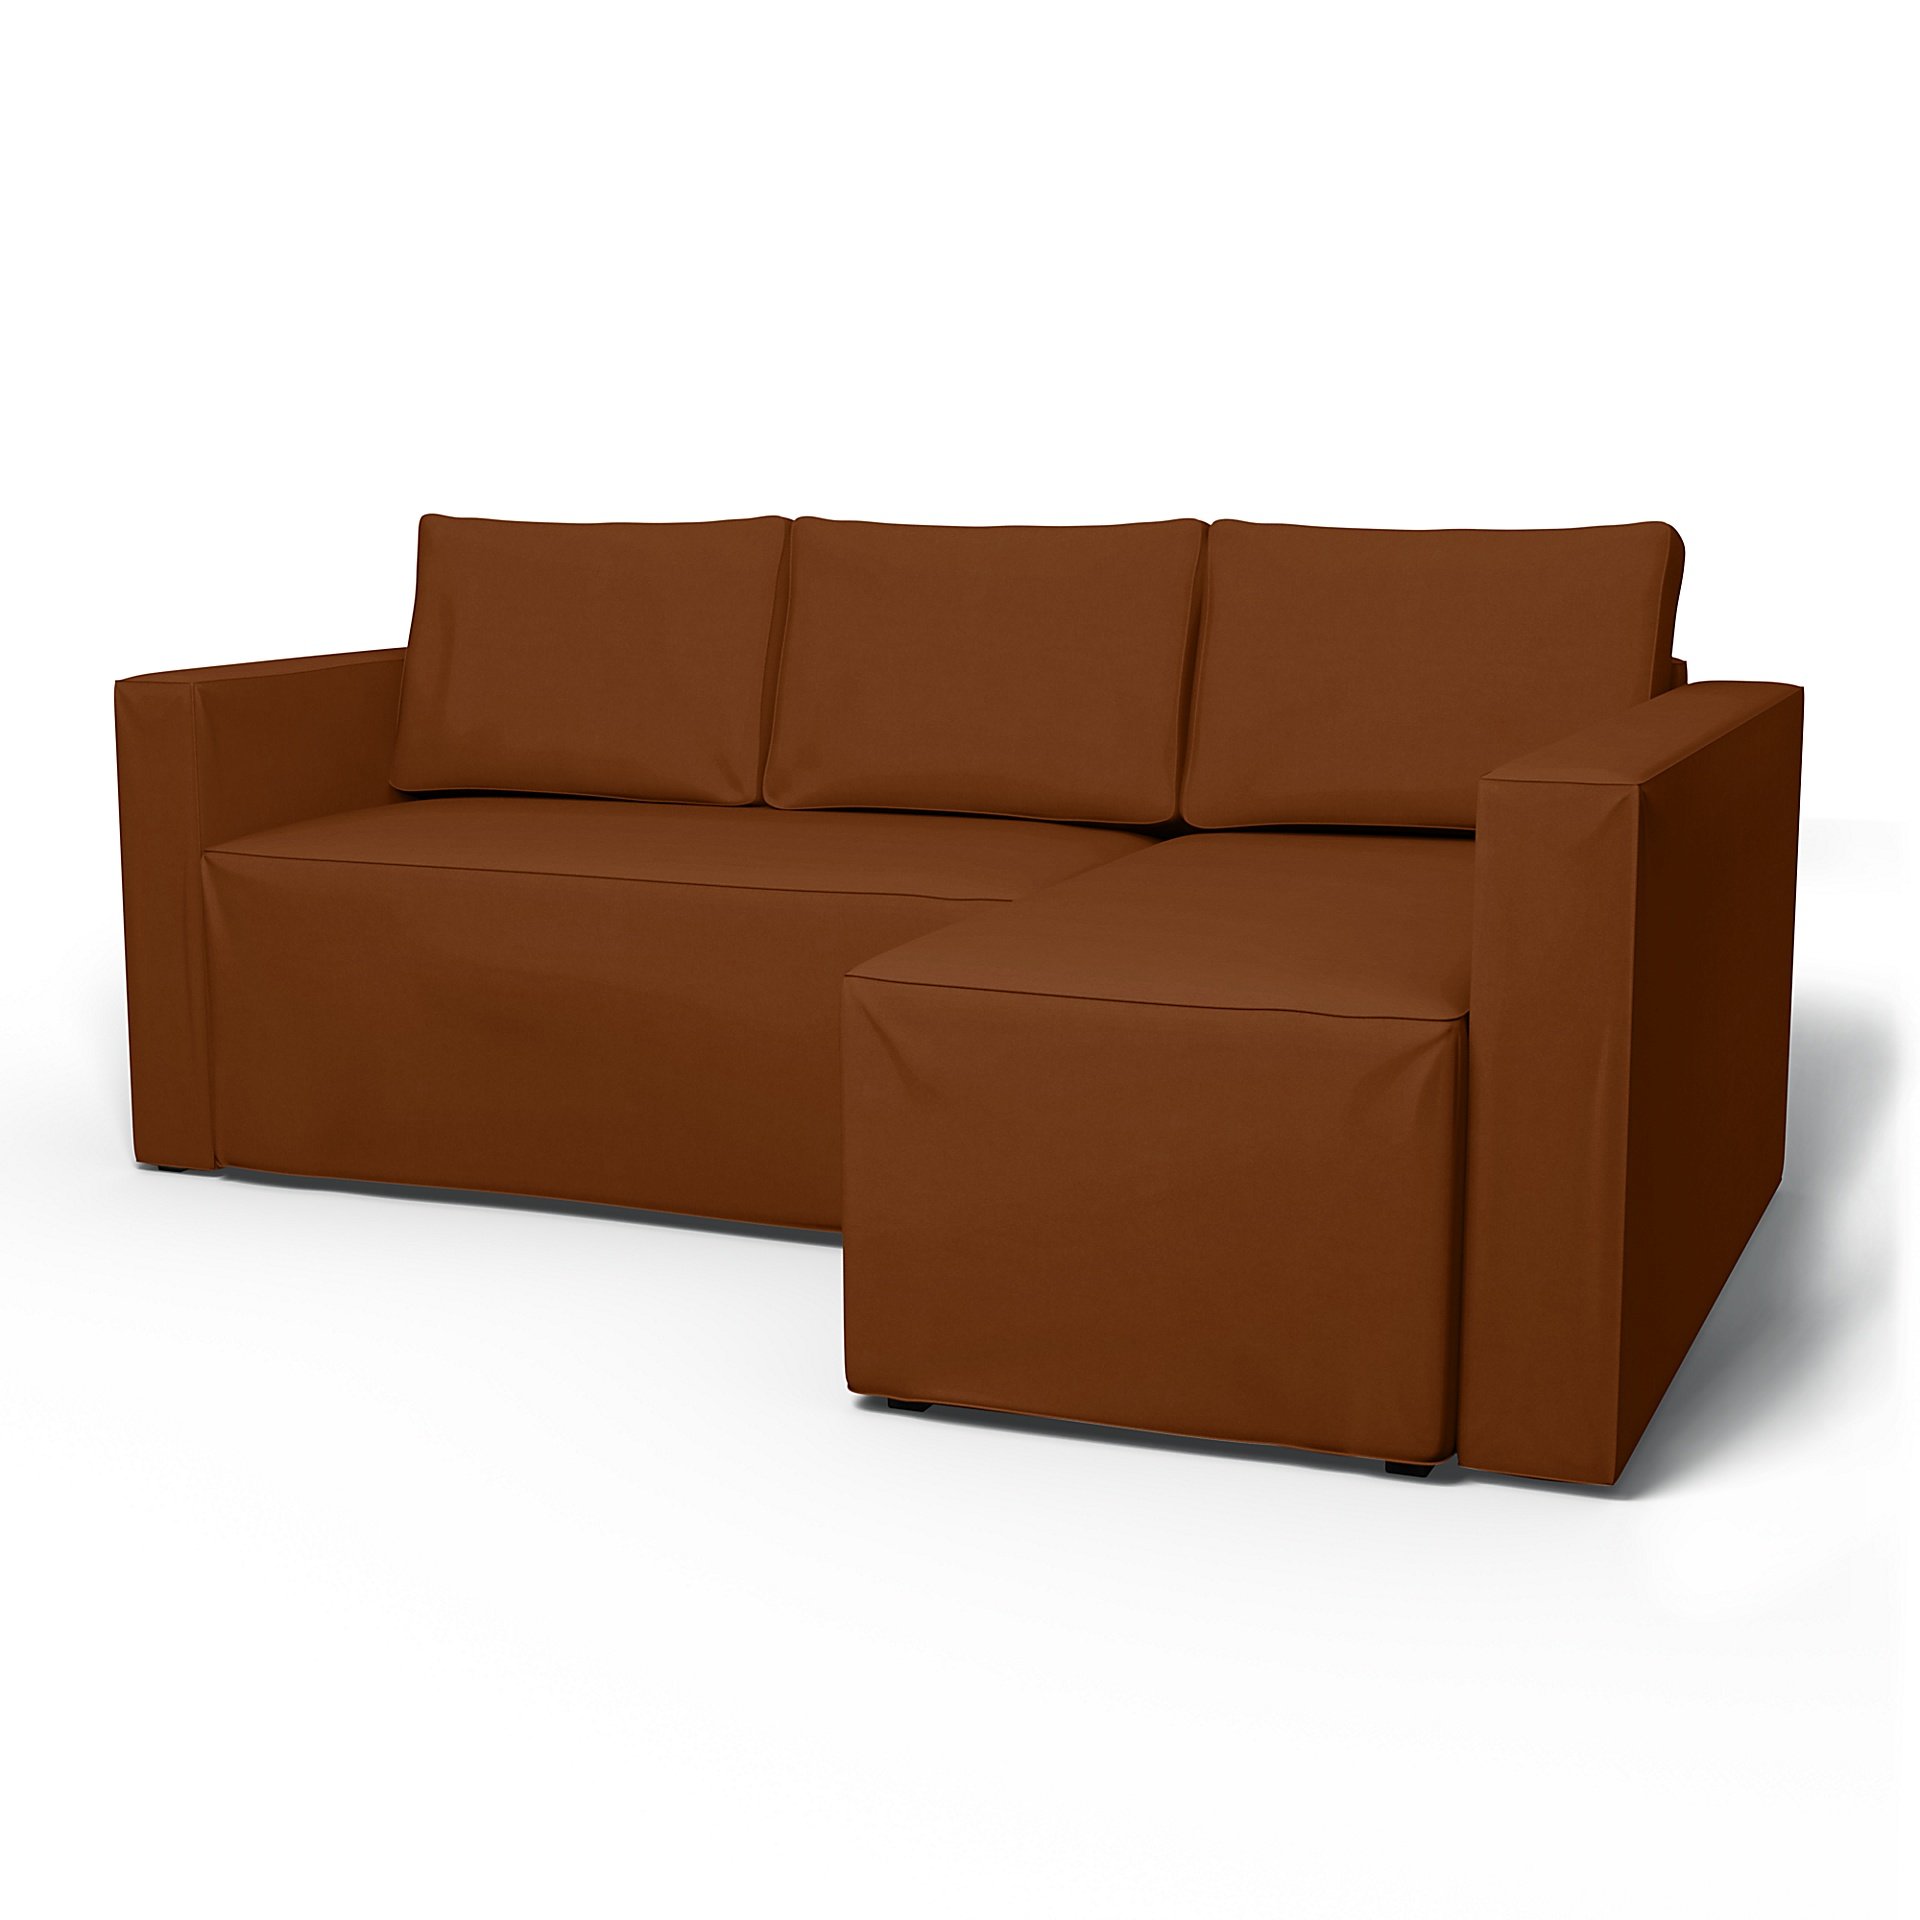 IKEA - Manstad Sofa Bed with Right Chaise Cover, Cinnamon, Velvet - Bemz